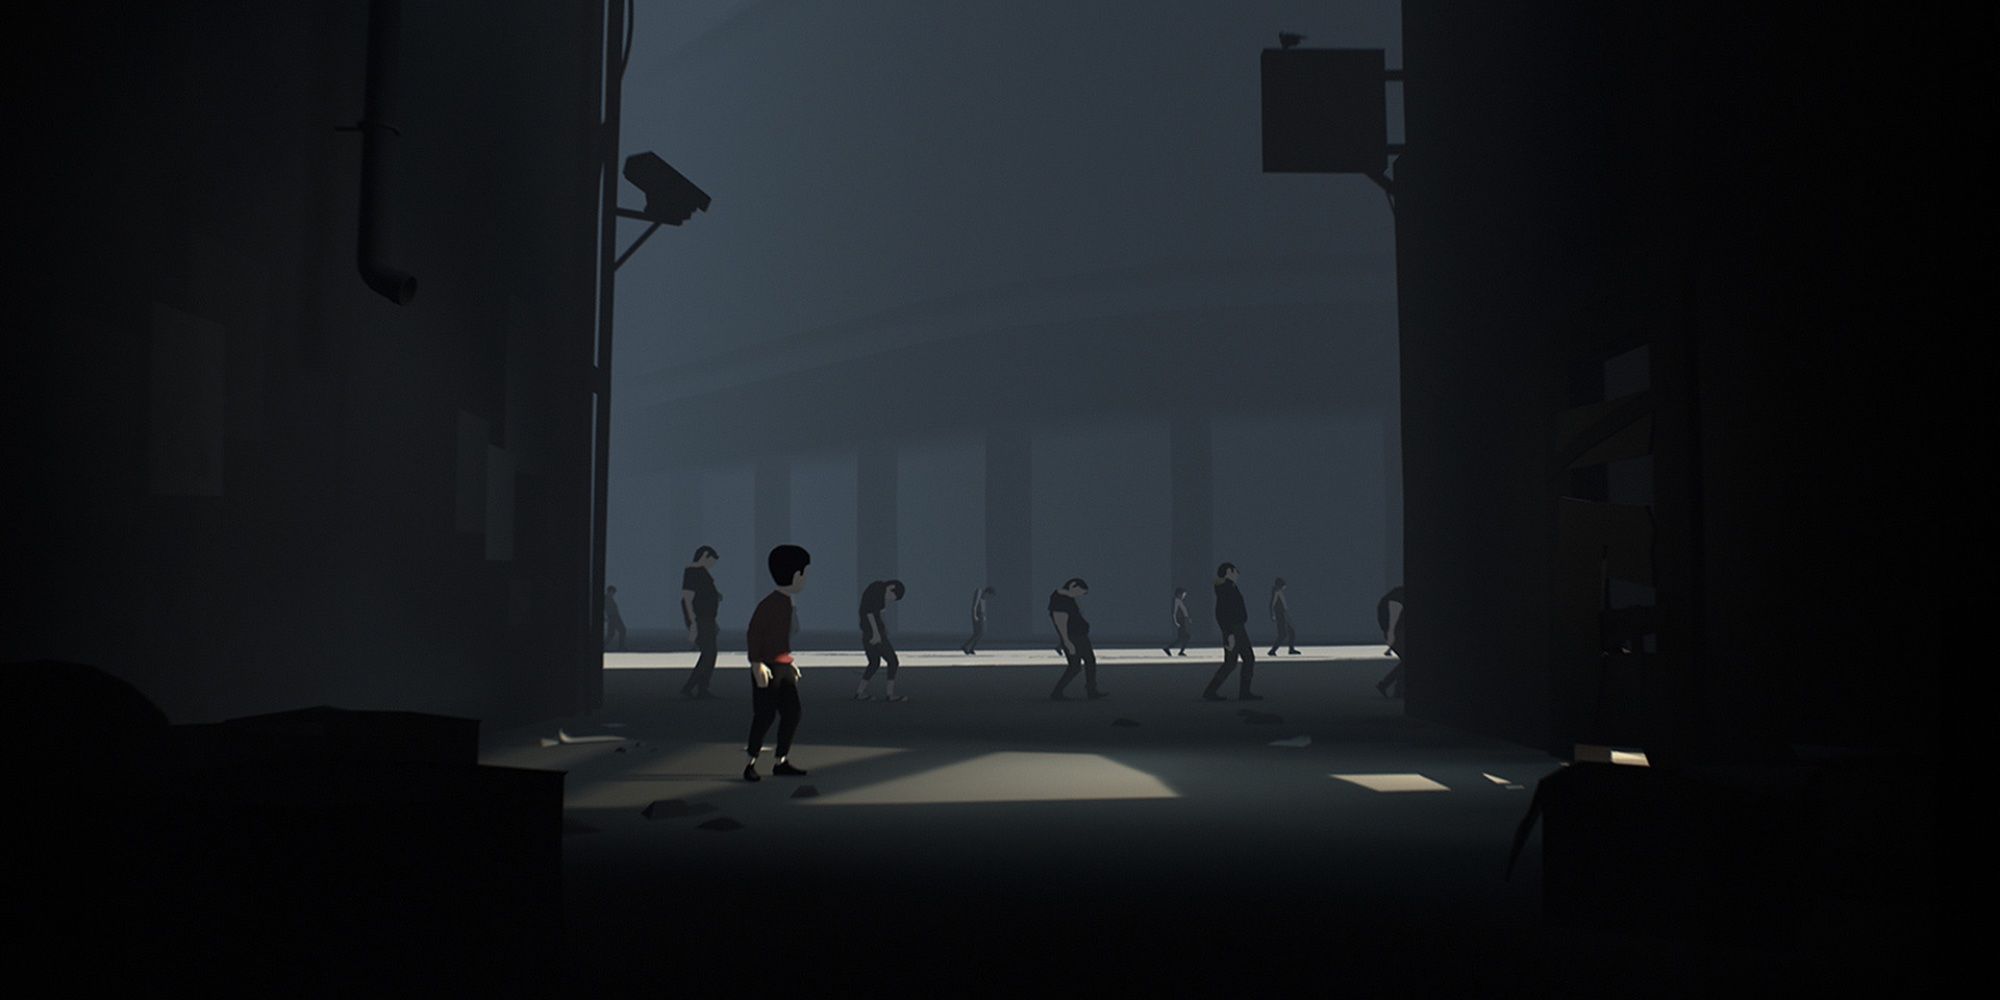 Player hiding in the dark looking at mind-controlled people marching 